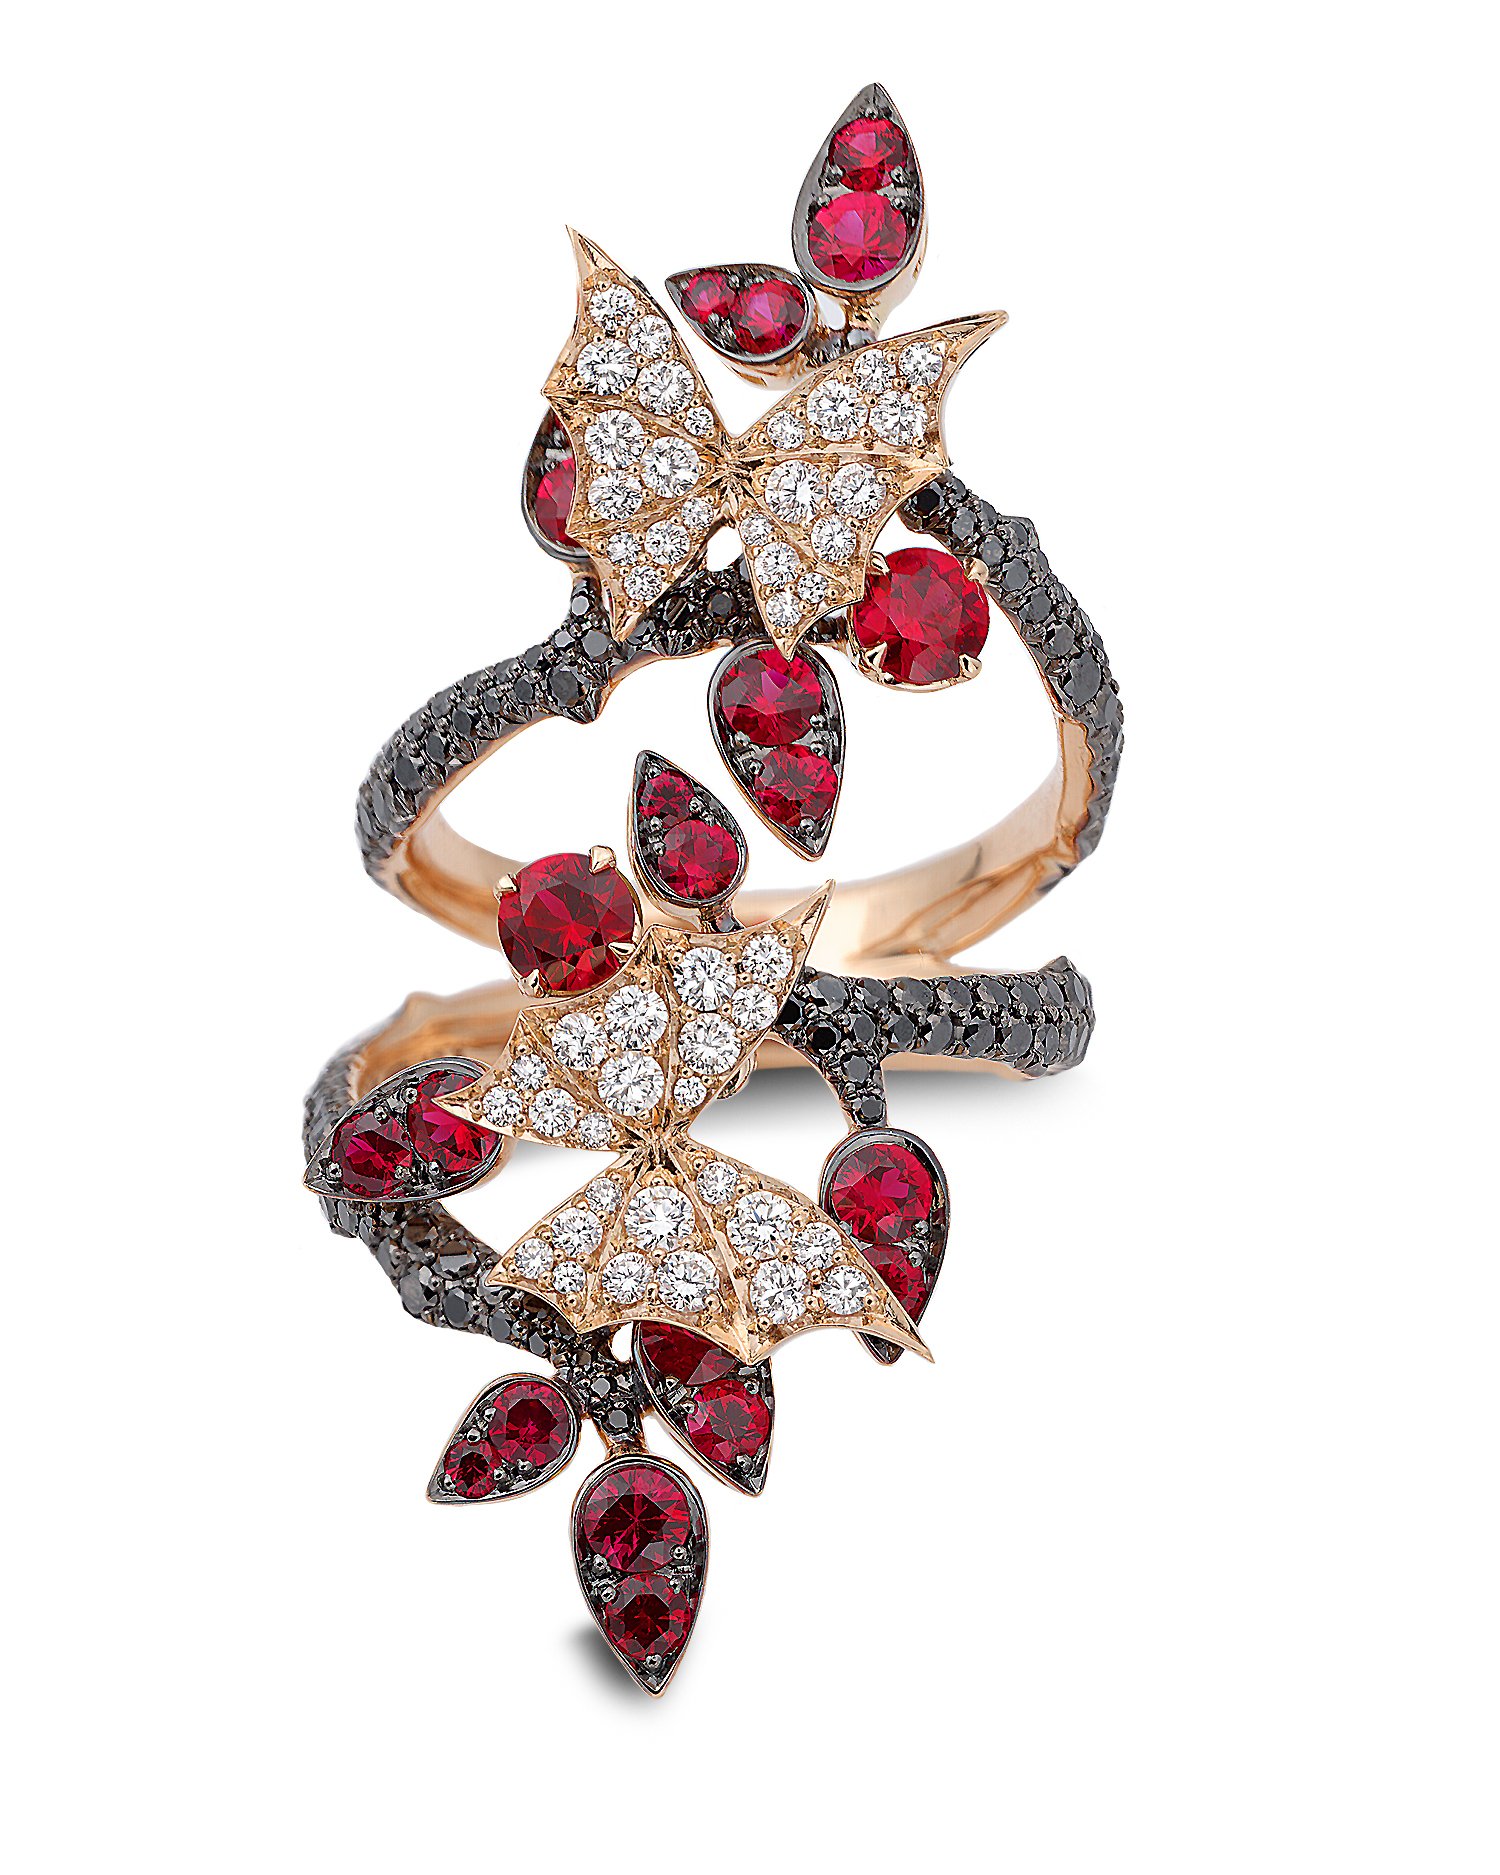 Fly by Night Forest Long Finger Ring with Pave Ruby, Black and White Diamonds in 18kt Rose Gold - Size 6.5